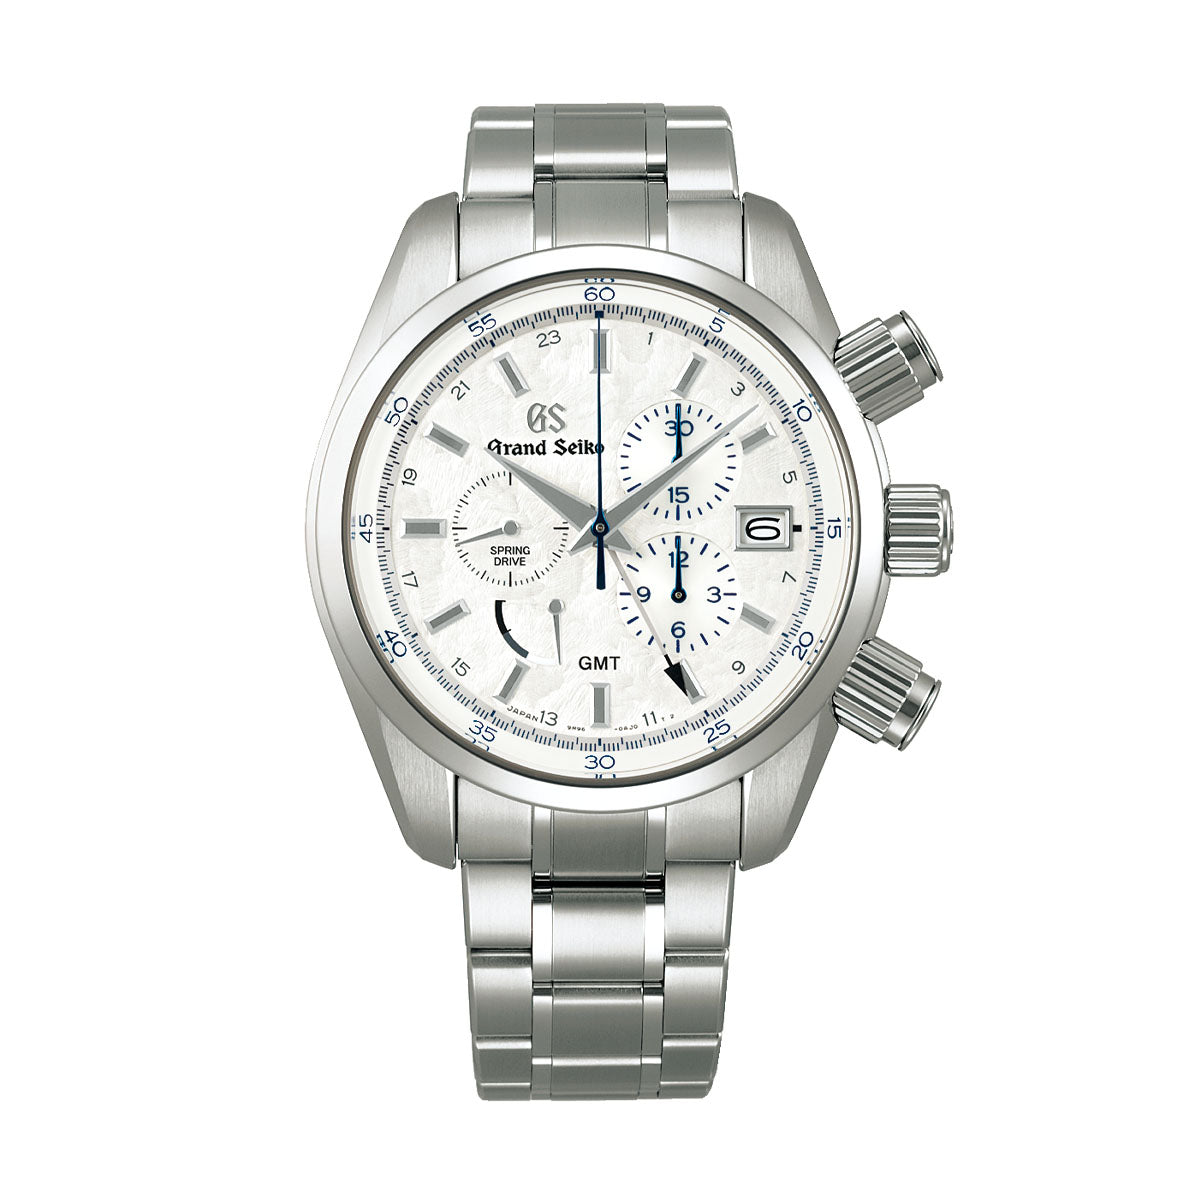 Grand Seiko Sport Collection Spring Drive Chronograph GMT 45.3mm Watch 15th Anniversary Limited Edition of 700 Pieces